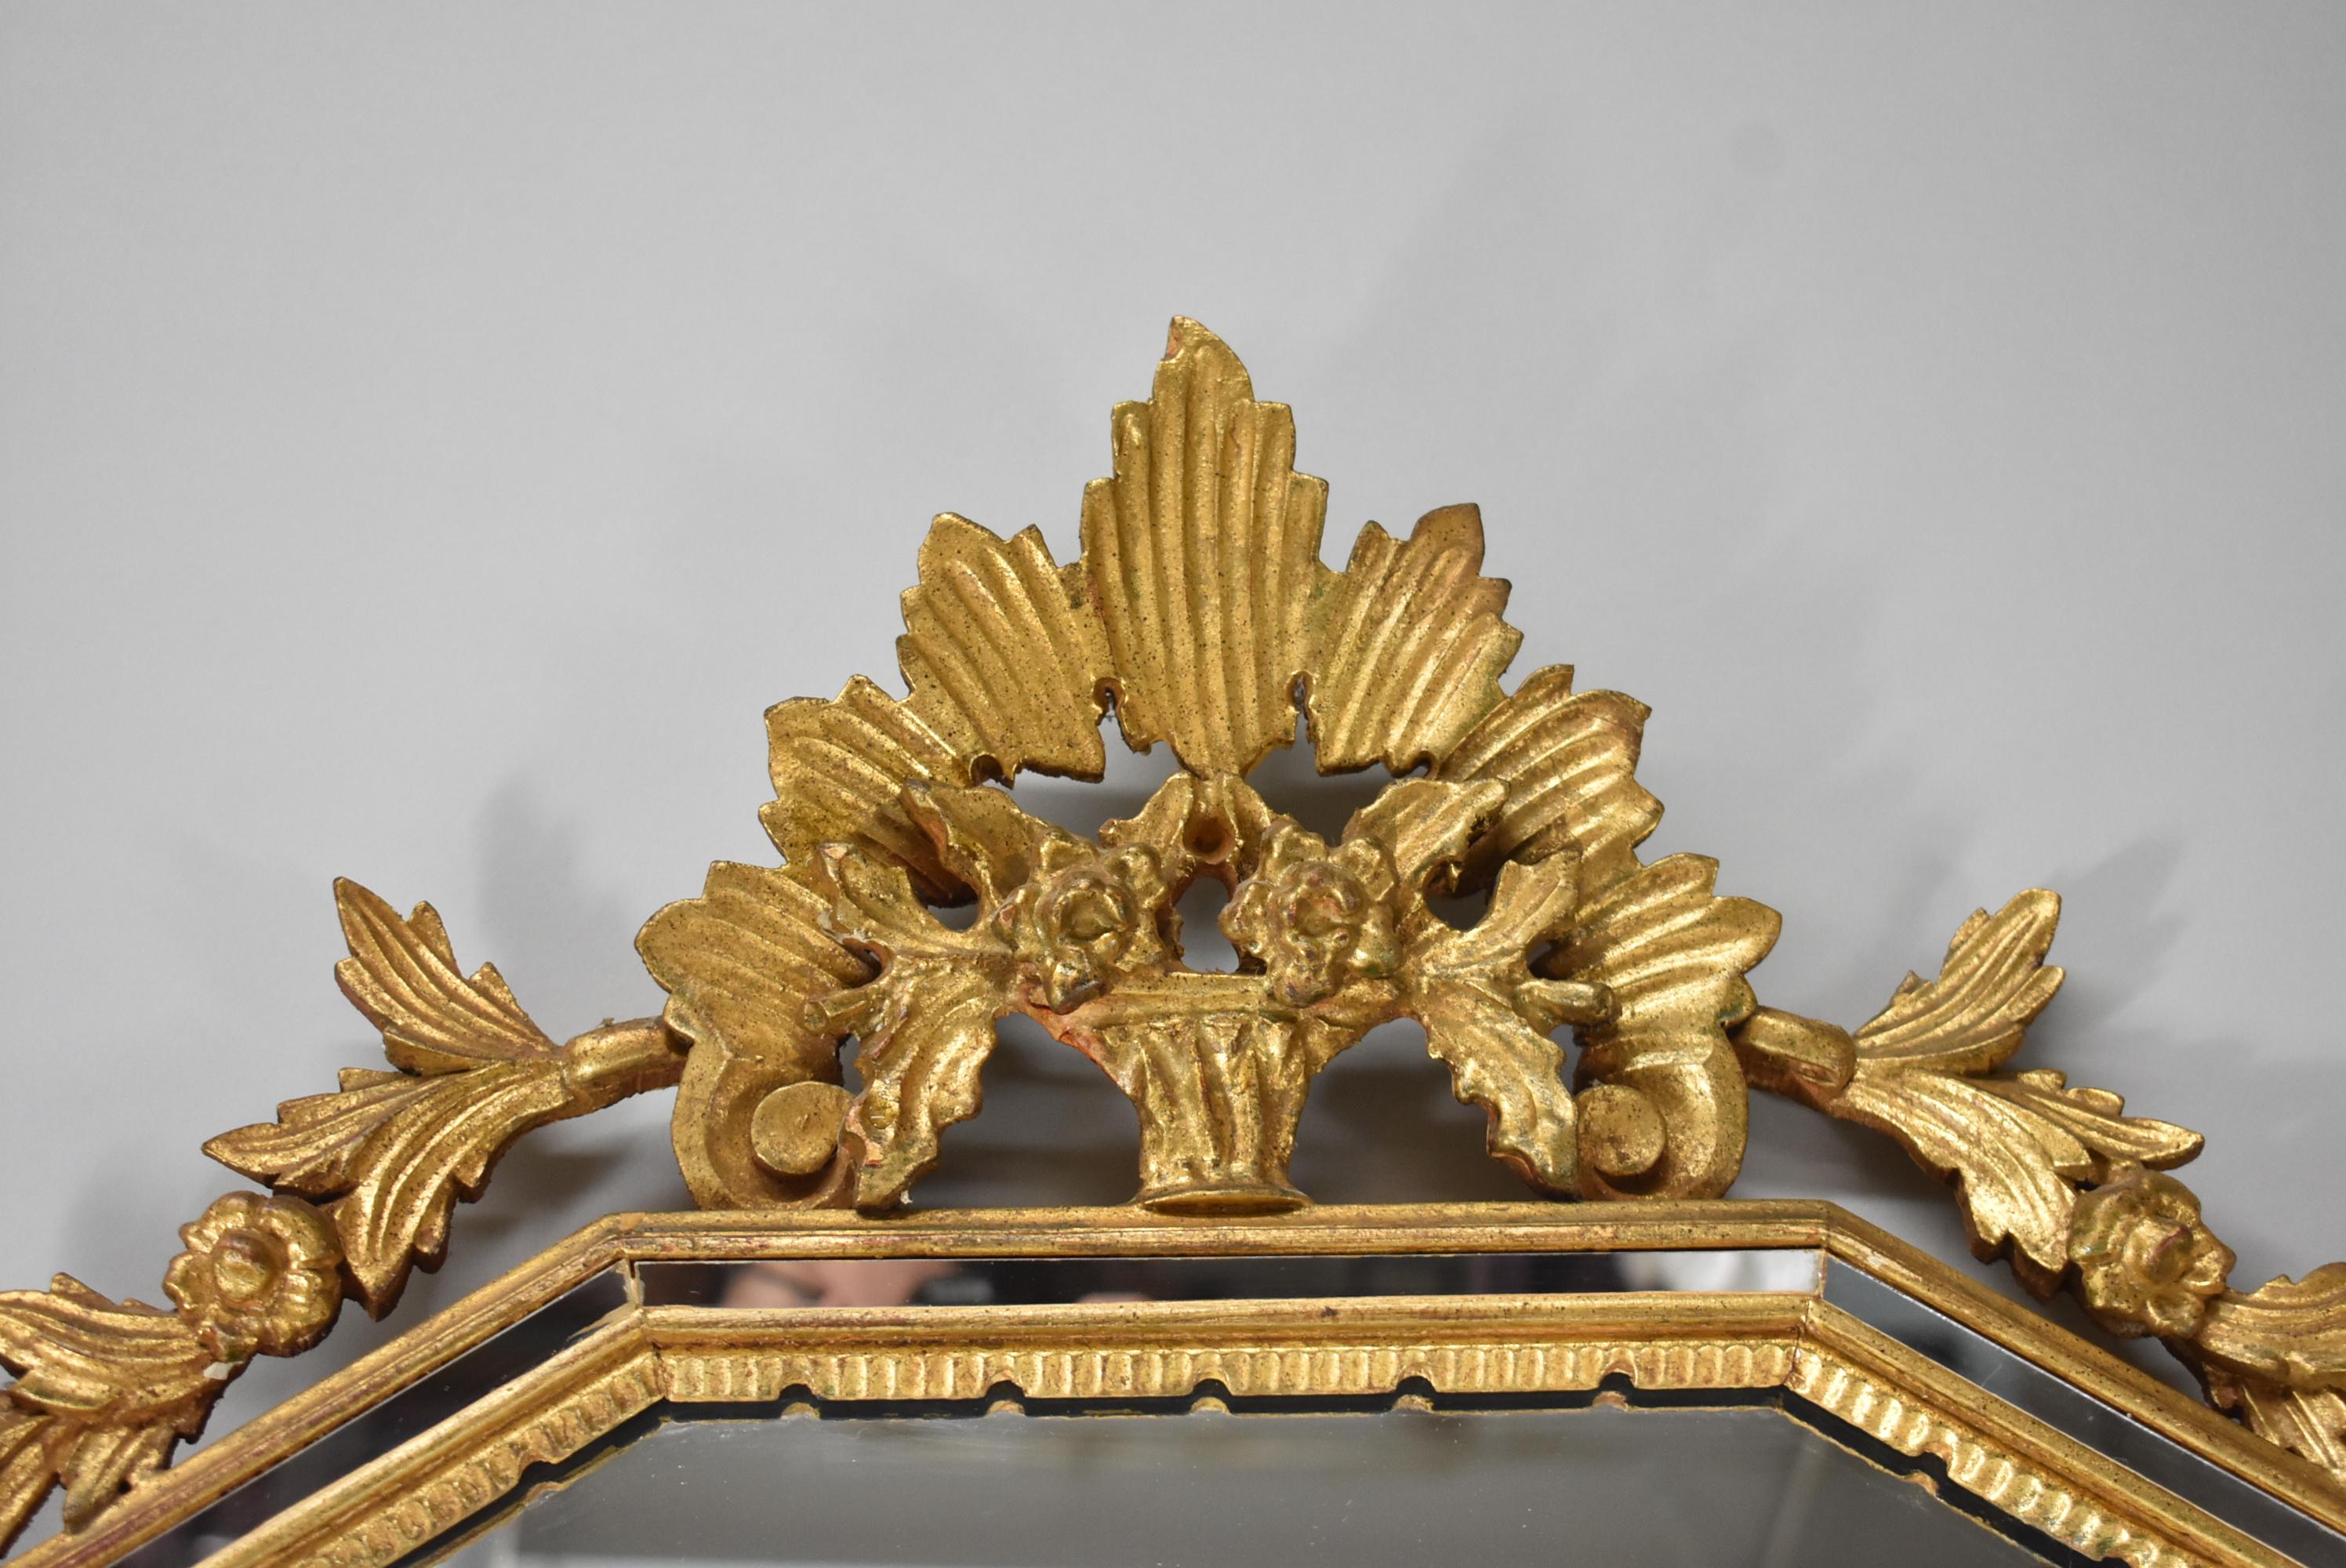 La Barge gold gilt mirror with carved floral basket details at the top. Decorative inlay mirror border.